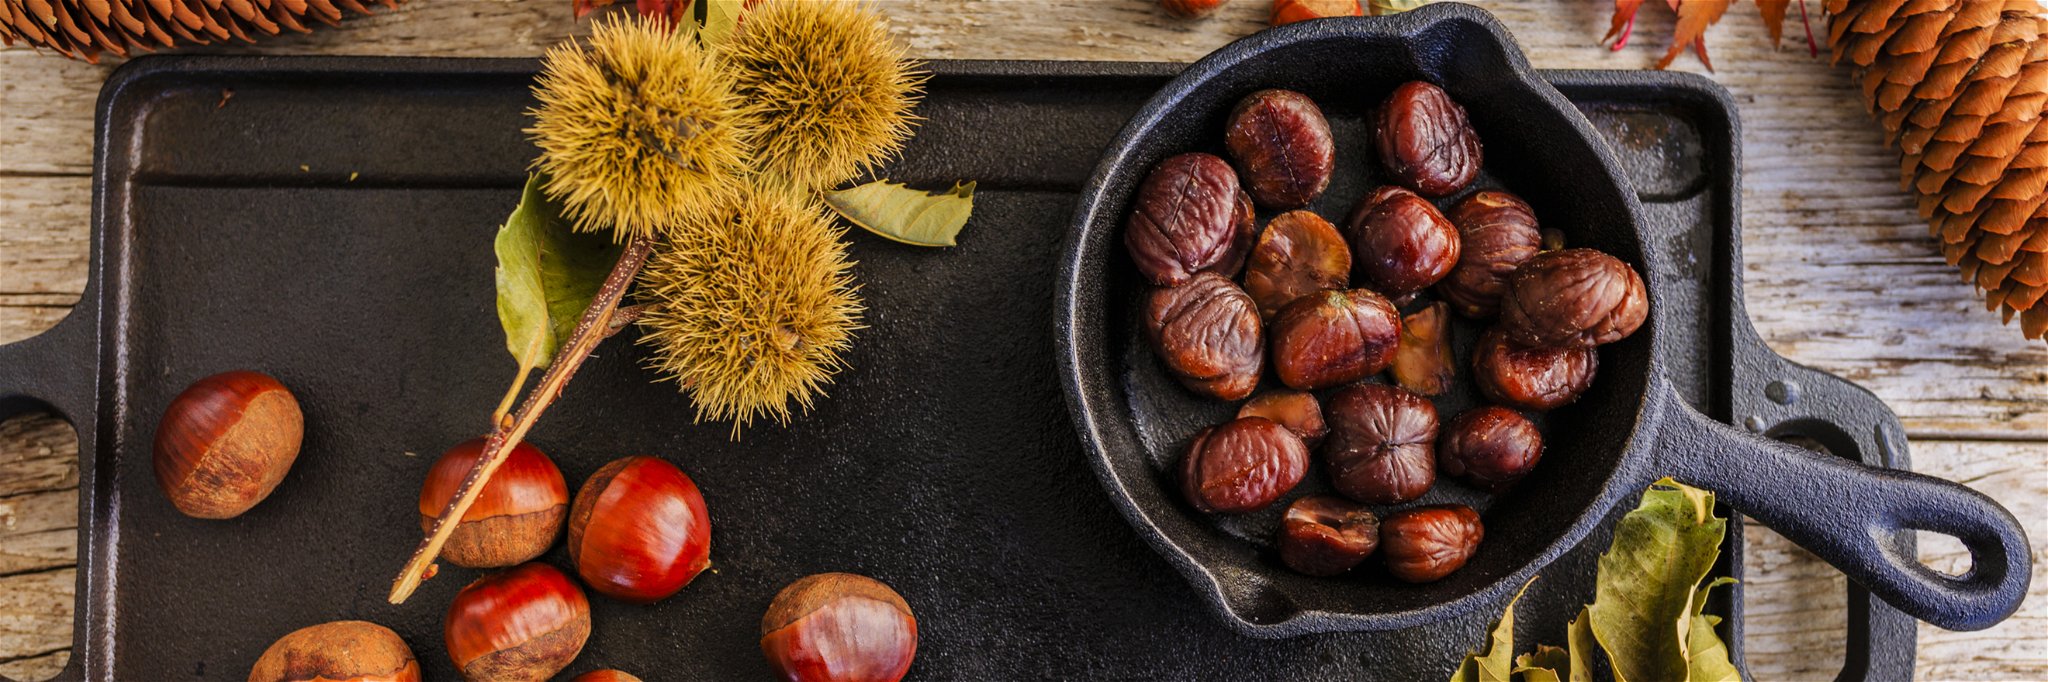 Roasted chestnuts are a delicious winter treat.